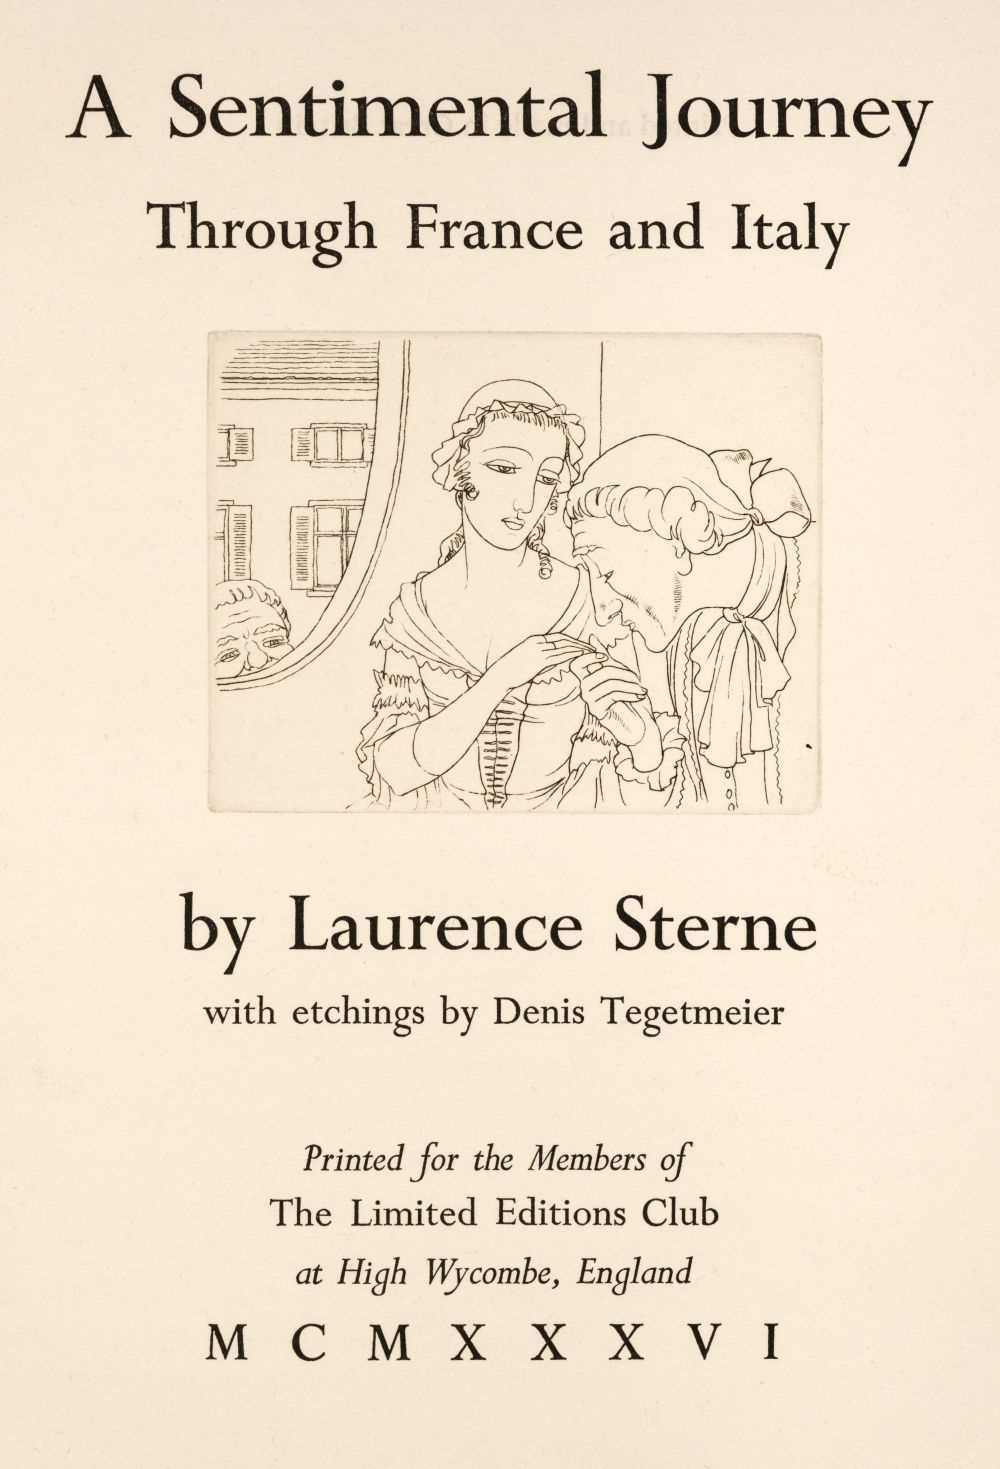 Lot 653 - Limited Editions Club. A Sentimental Journey through France and Italy by Laurence Sterne